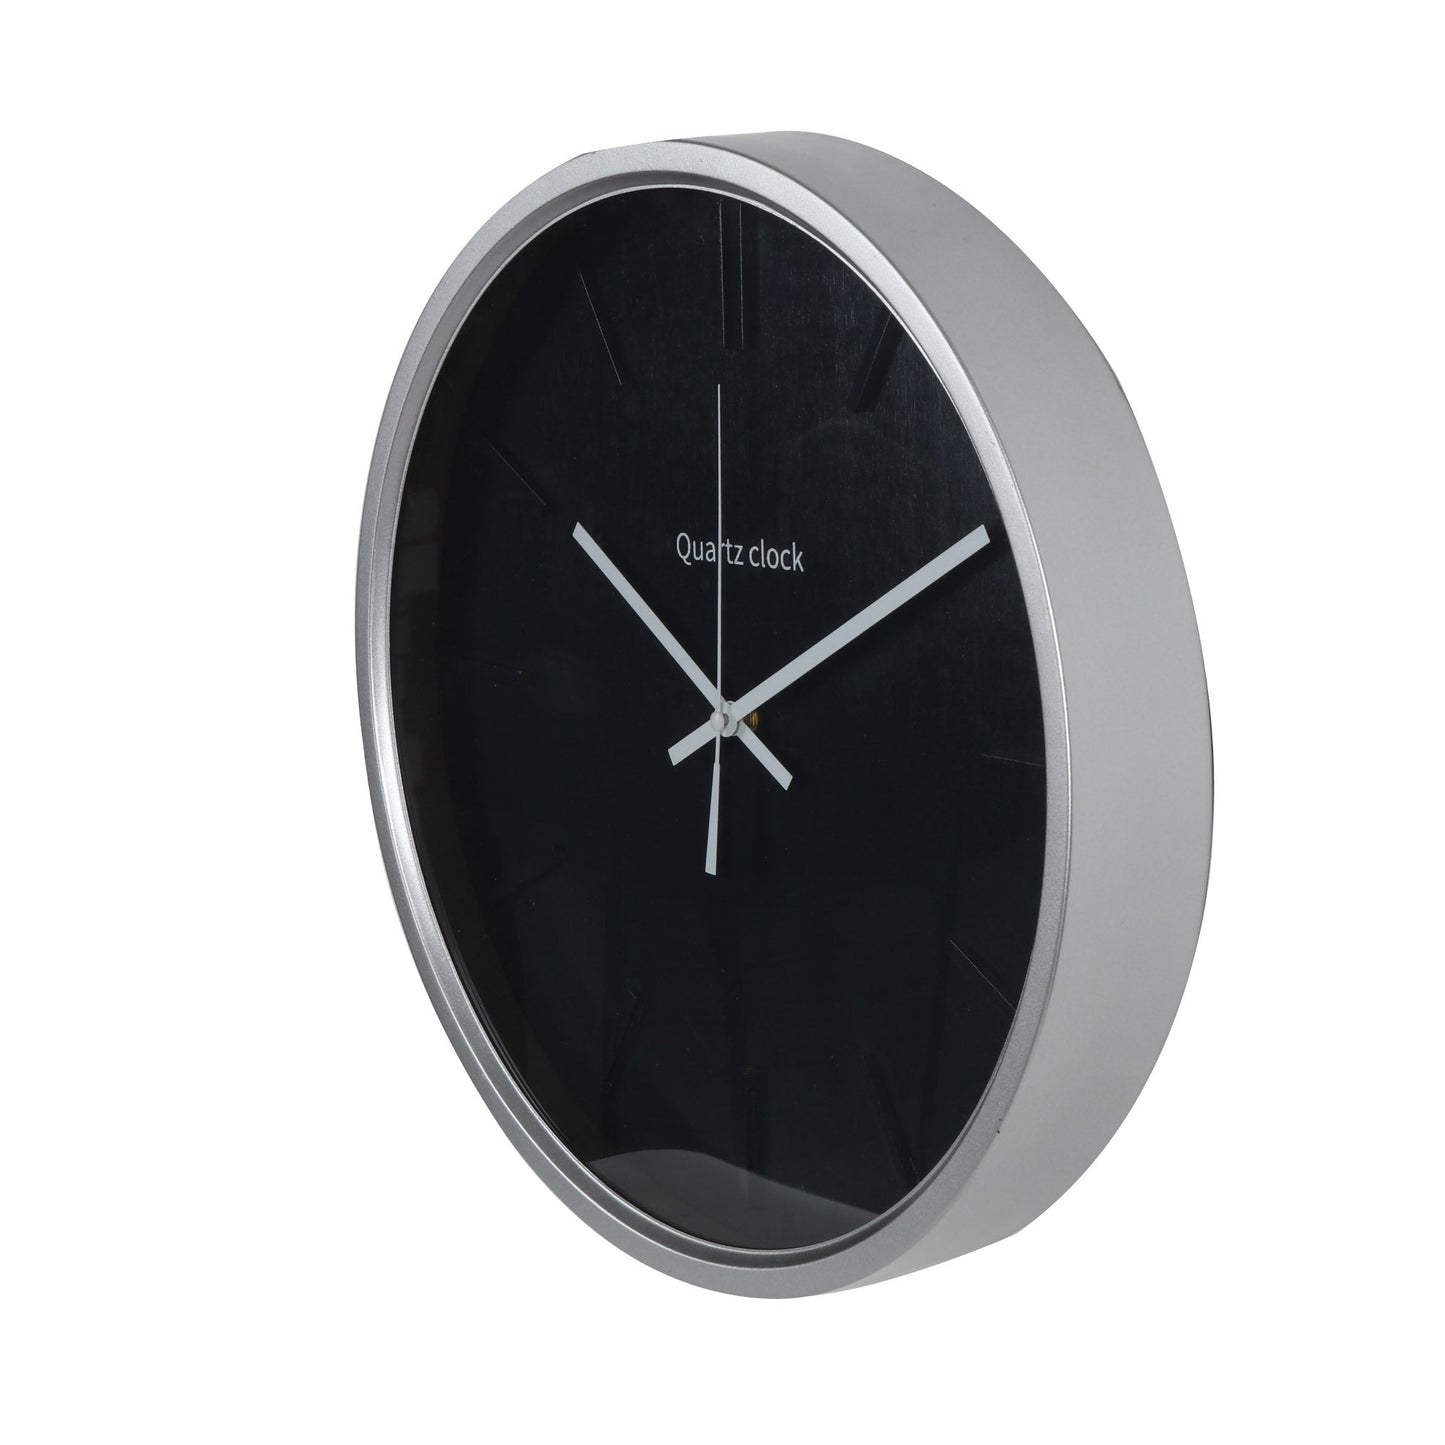 Wall Clock - Black and Silver 40x40x6cm - Iron